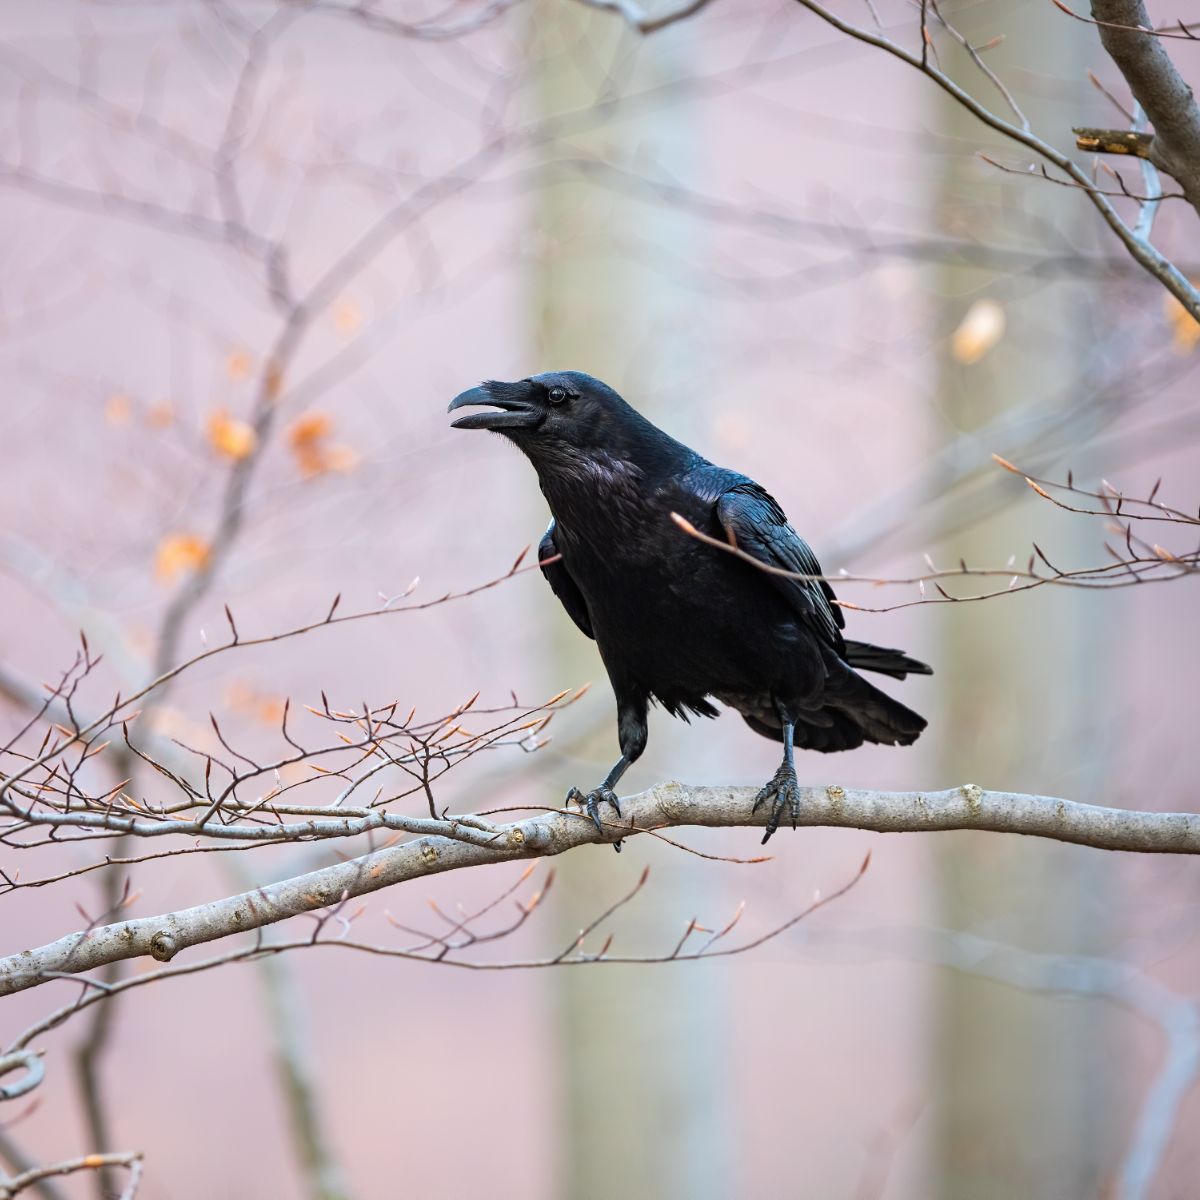 Single Black Crow - Meaning And Symbolism